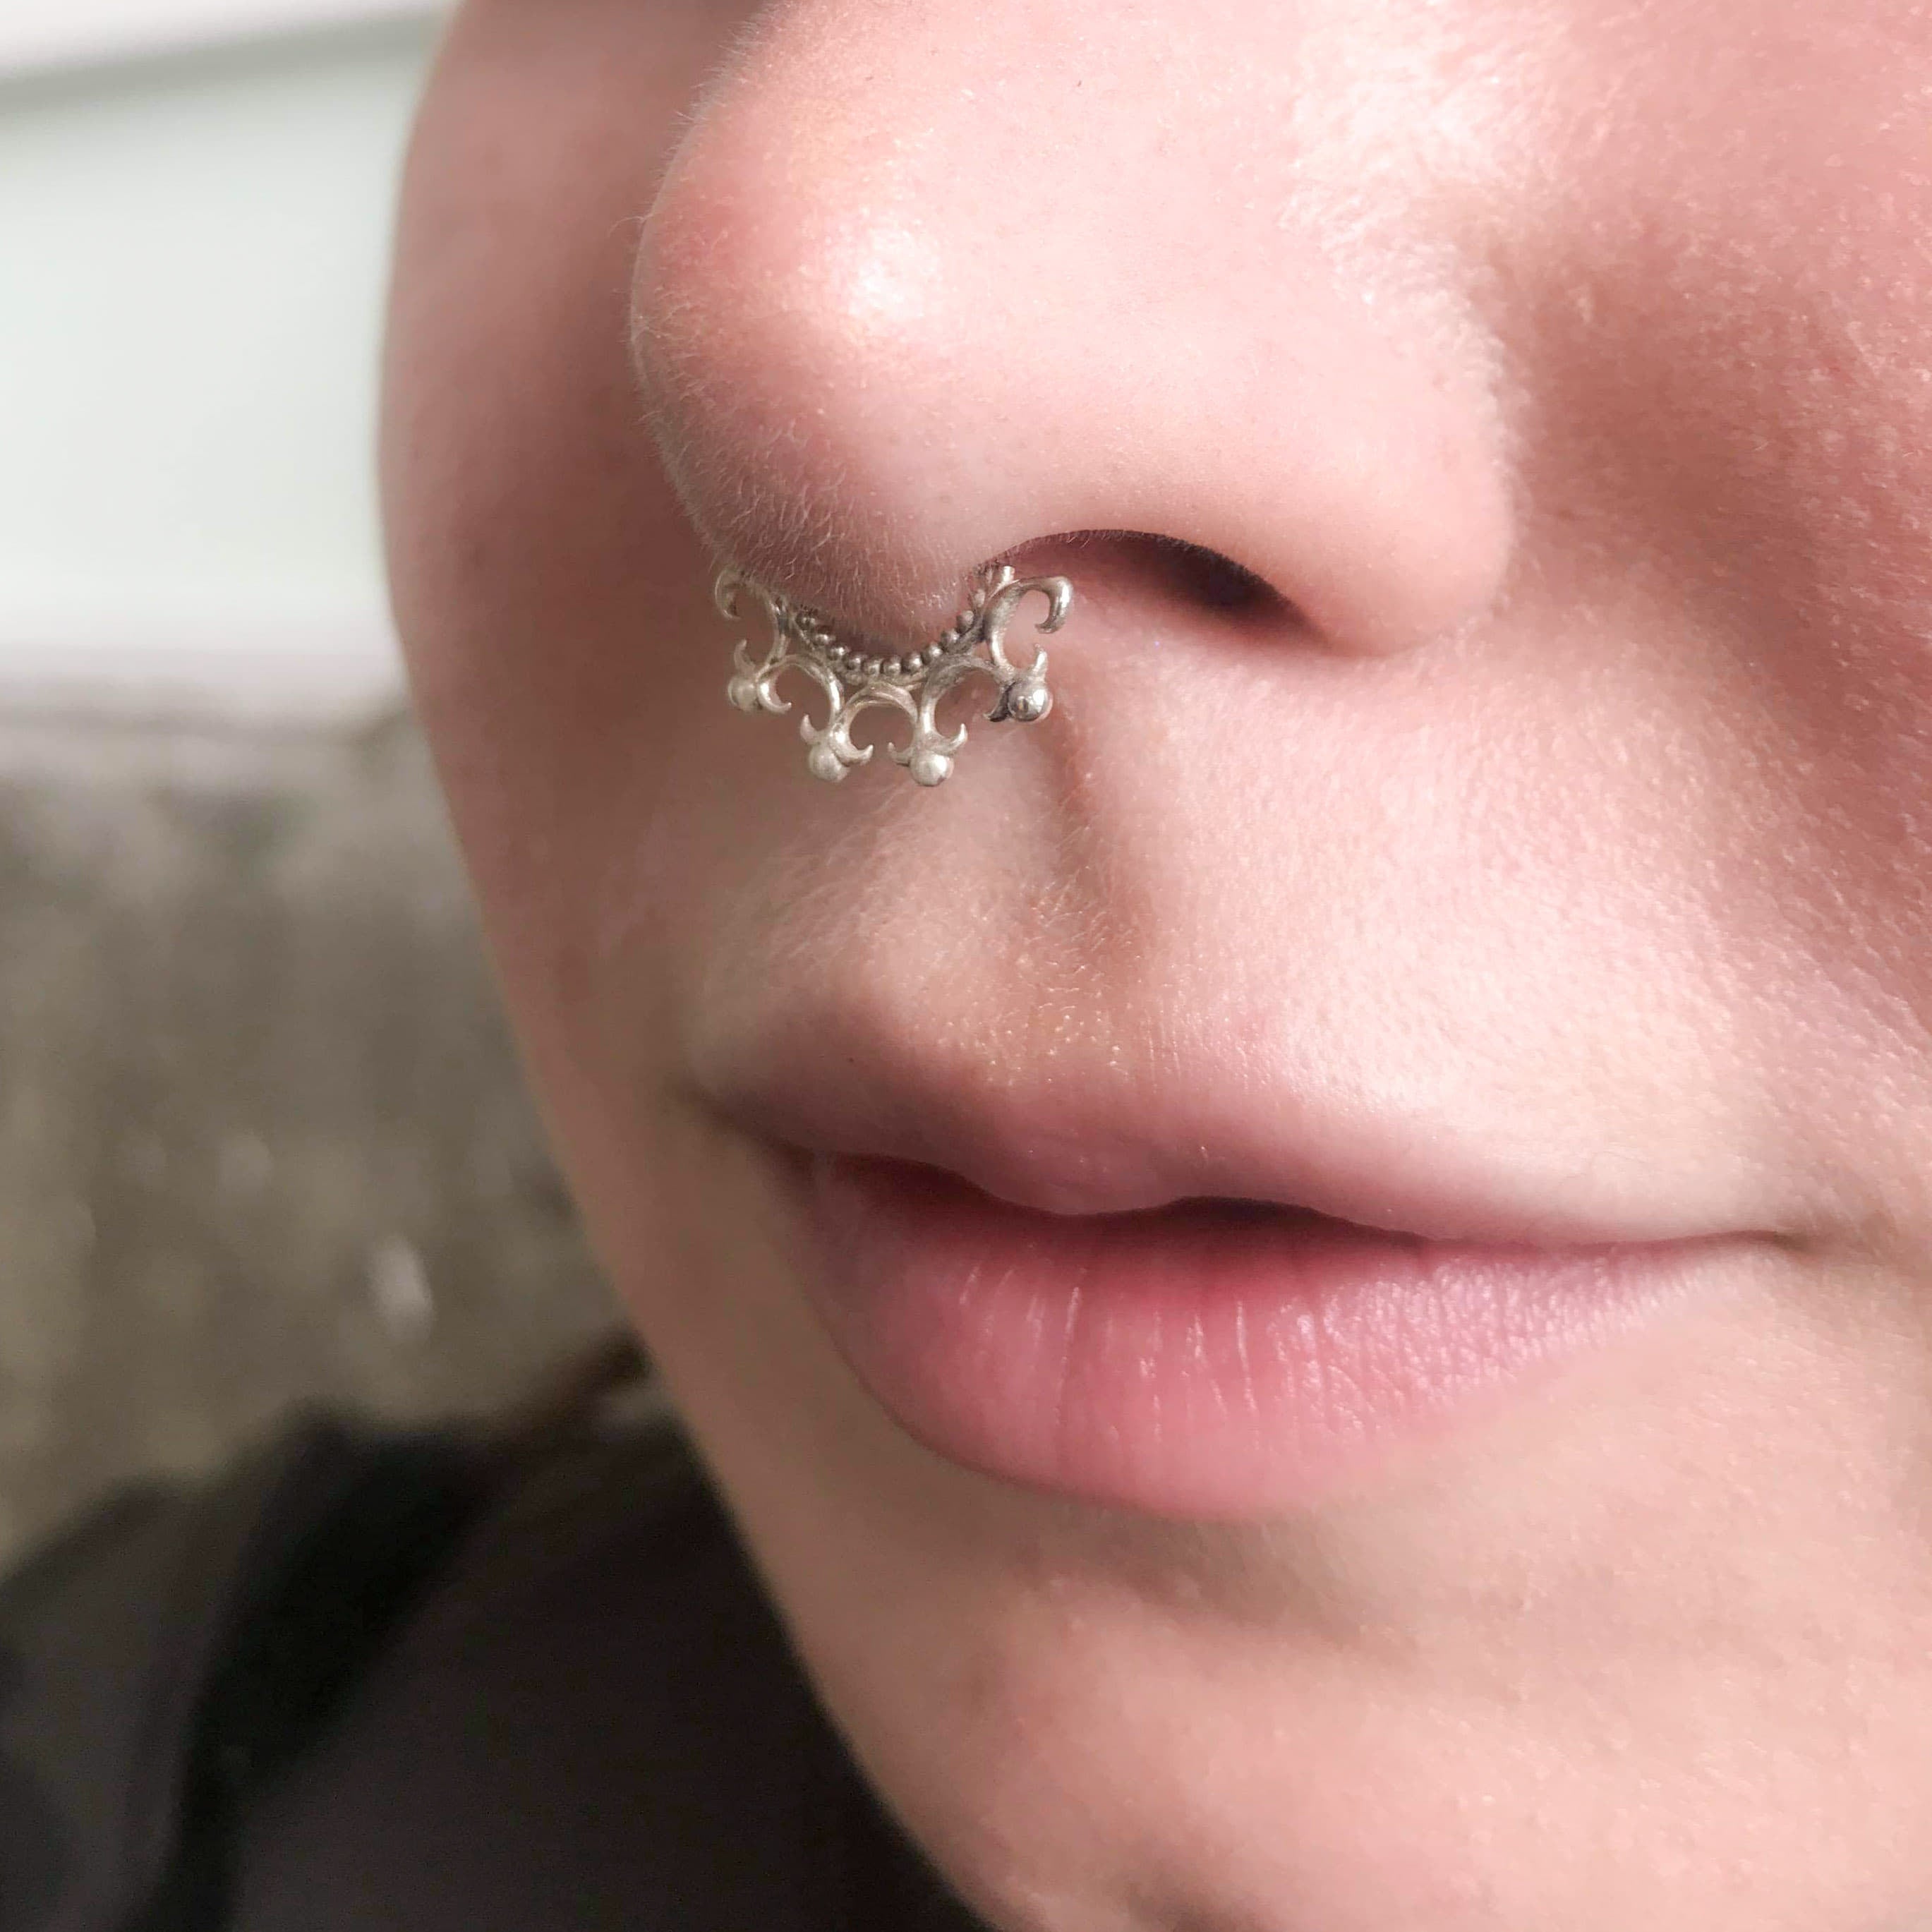 GERMAN SILVER SEPTUM NOSE RING FOR GIRLS AND WOMENS / NOSEPINS / OXIDISED SEPTUM  RING / PACK OF 12 PEICE SEPTUM NOSE RING / BRASS SEPTUM RING / GERMAN SILVER  NOSE RING / OXIDISED NOSE RING